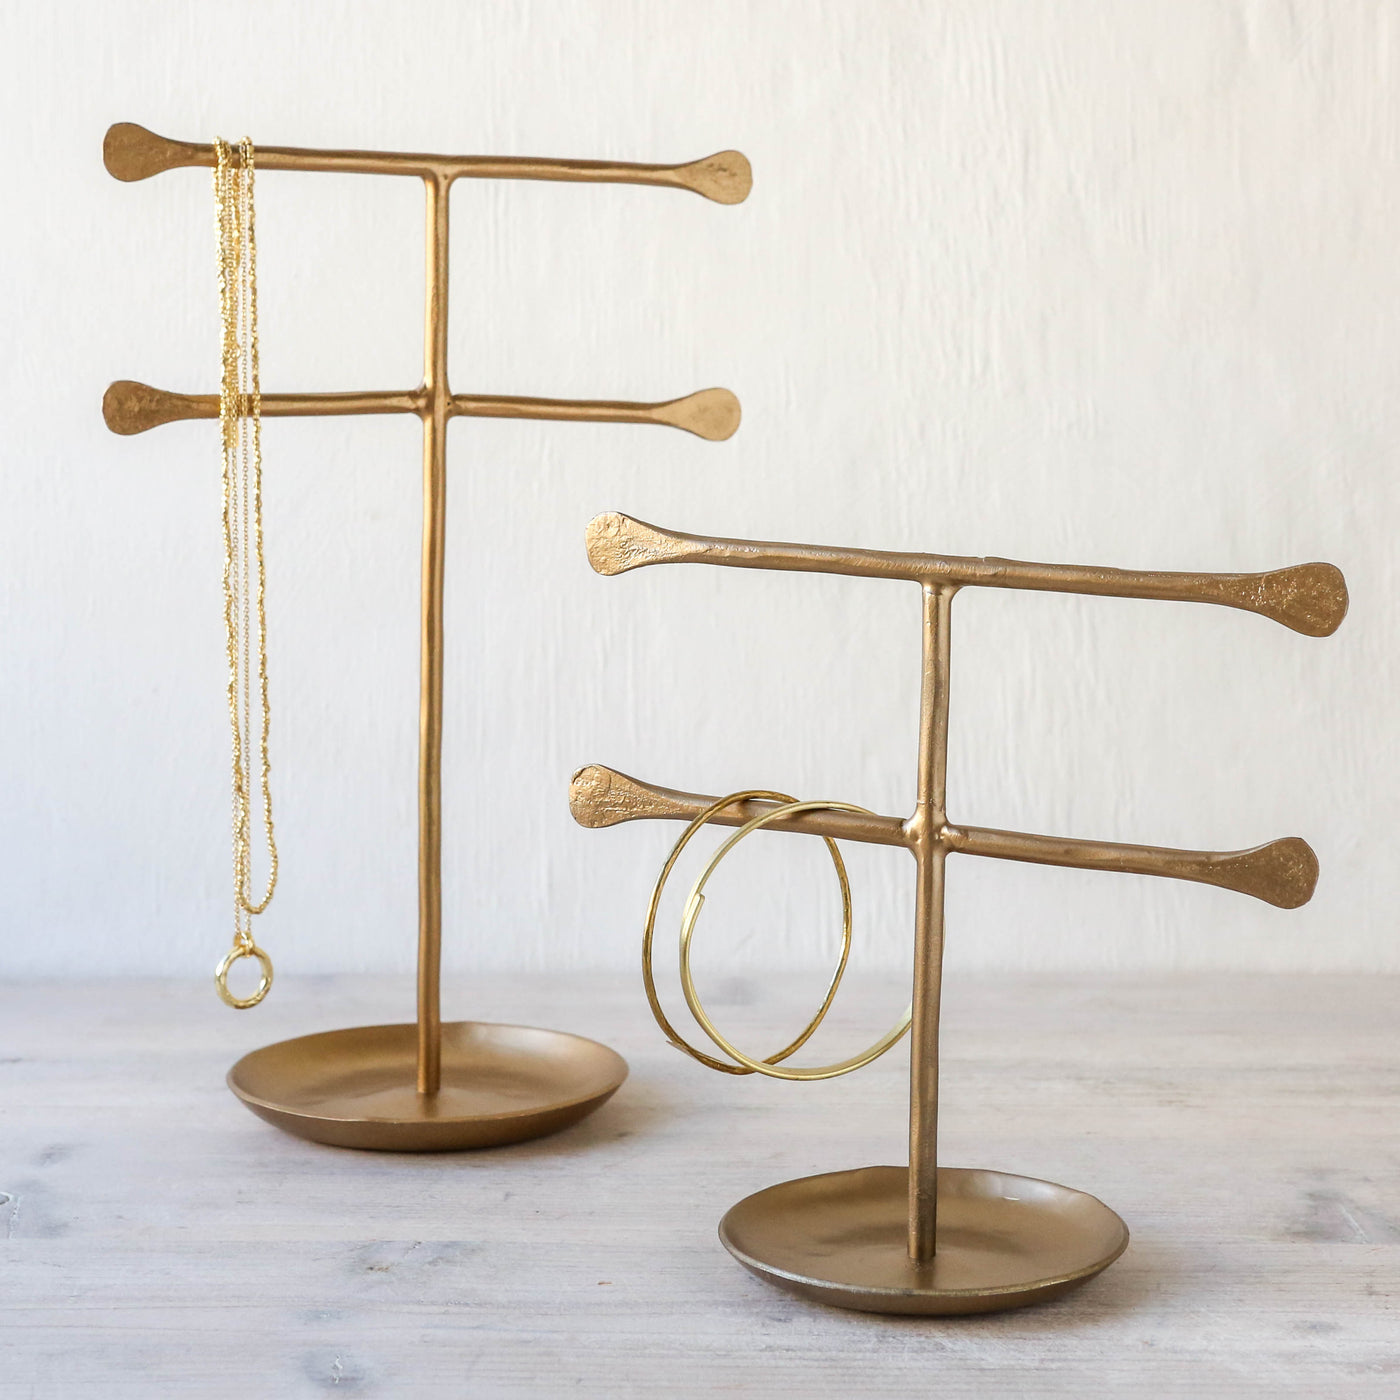 Liman Jewellery Stand - Large